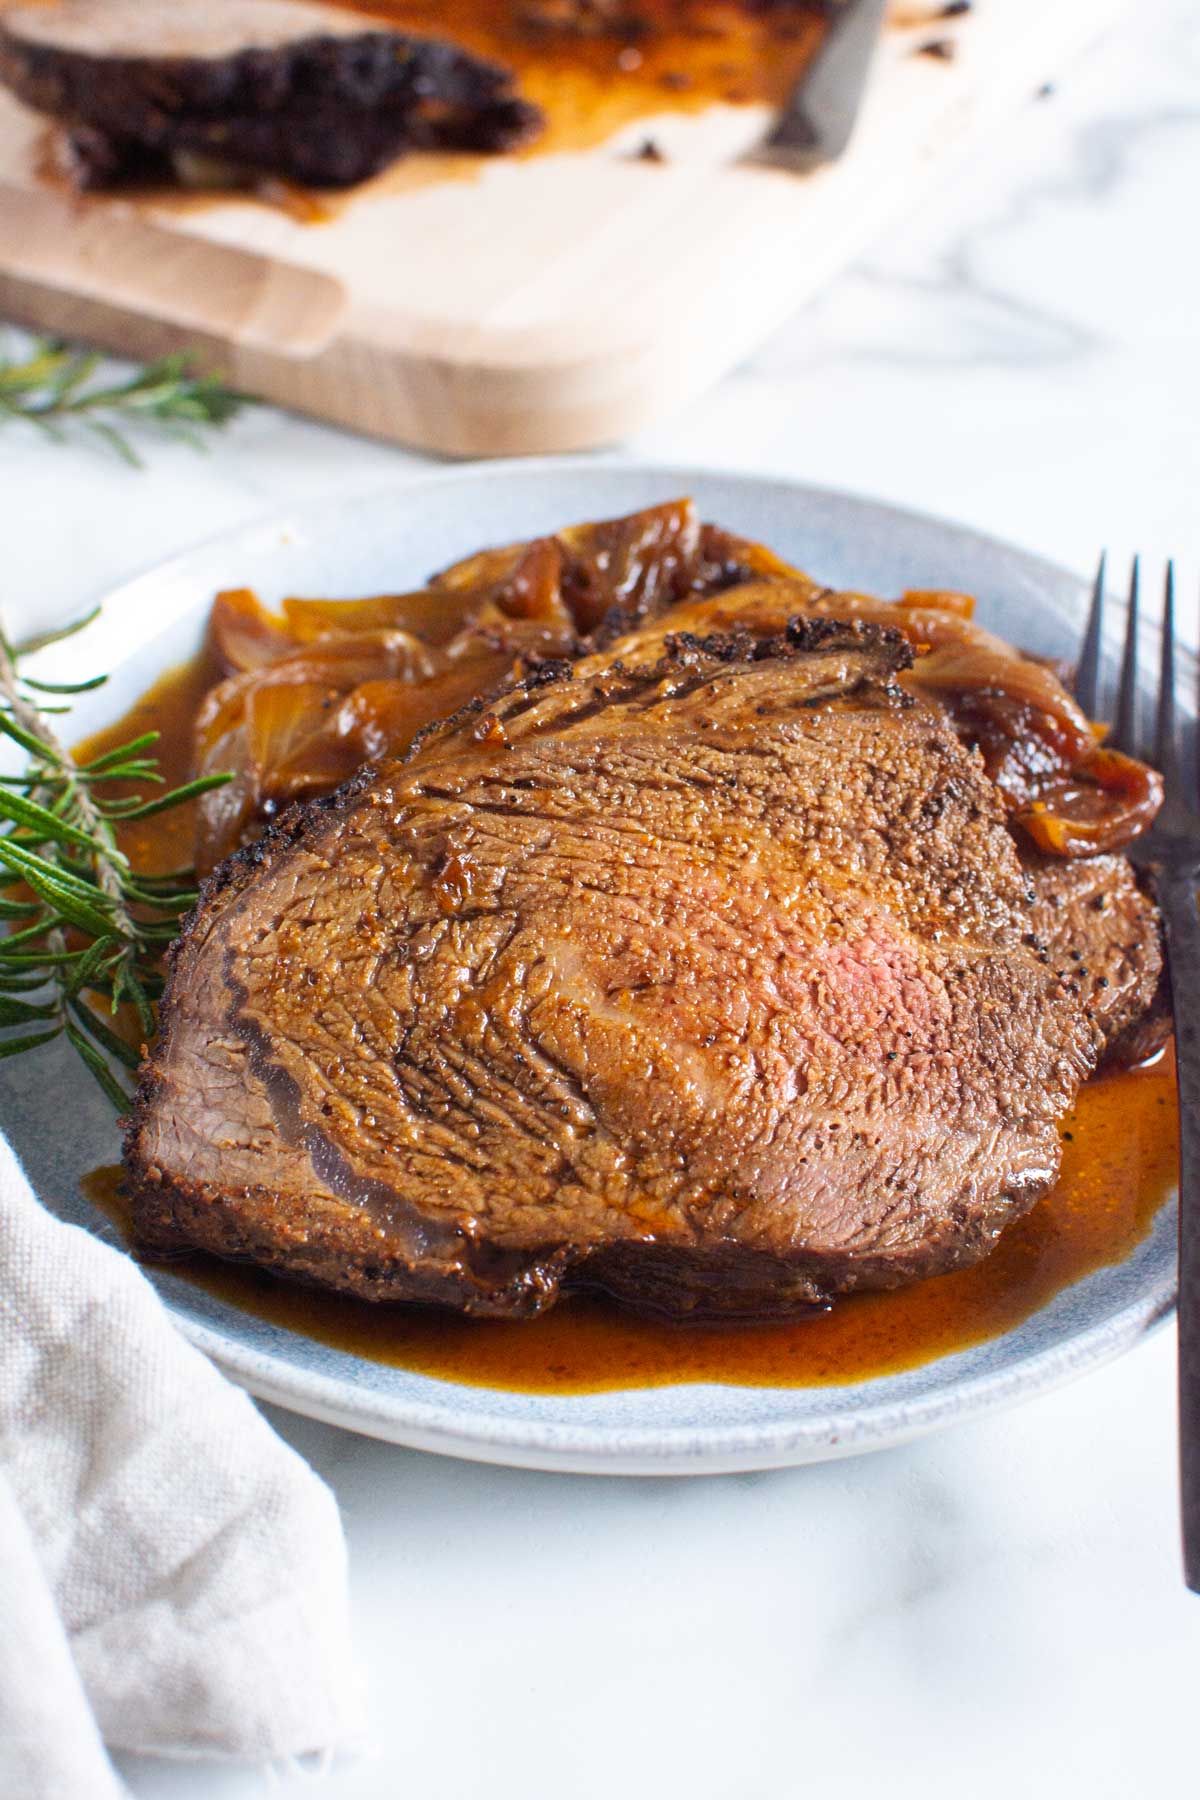 Sirloin tip roast recipe with pan juices on a plate ready to eat with napkin and fork.